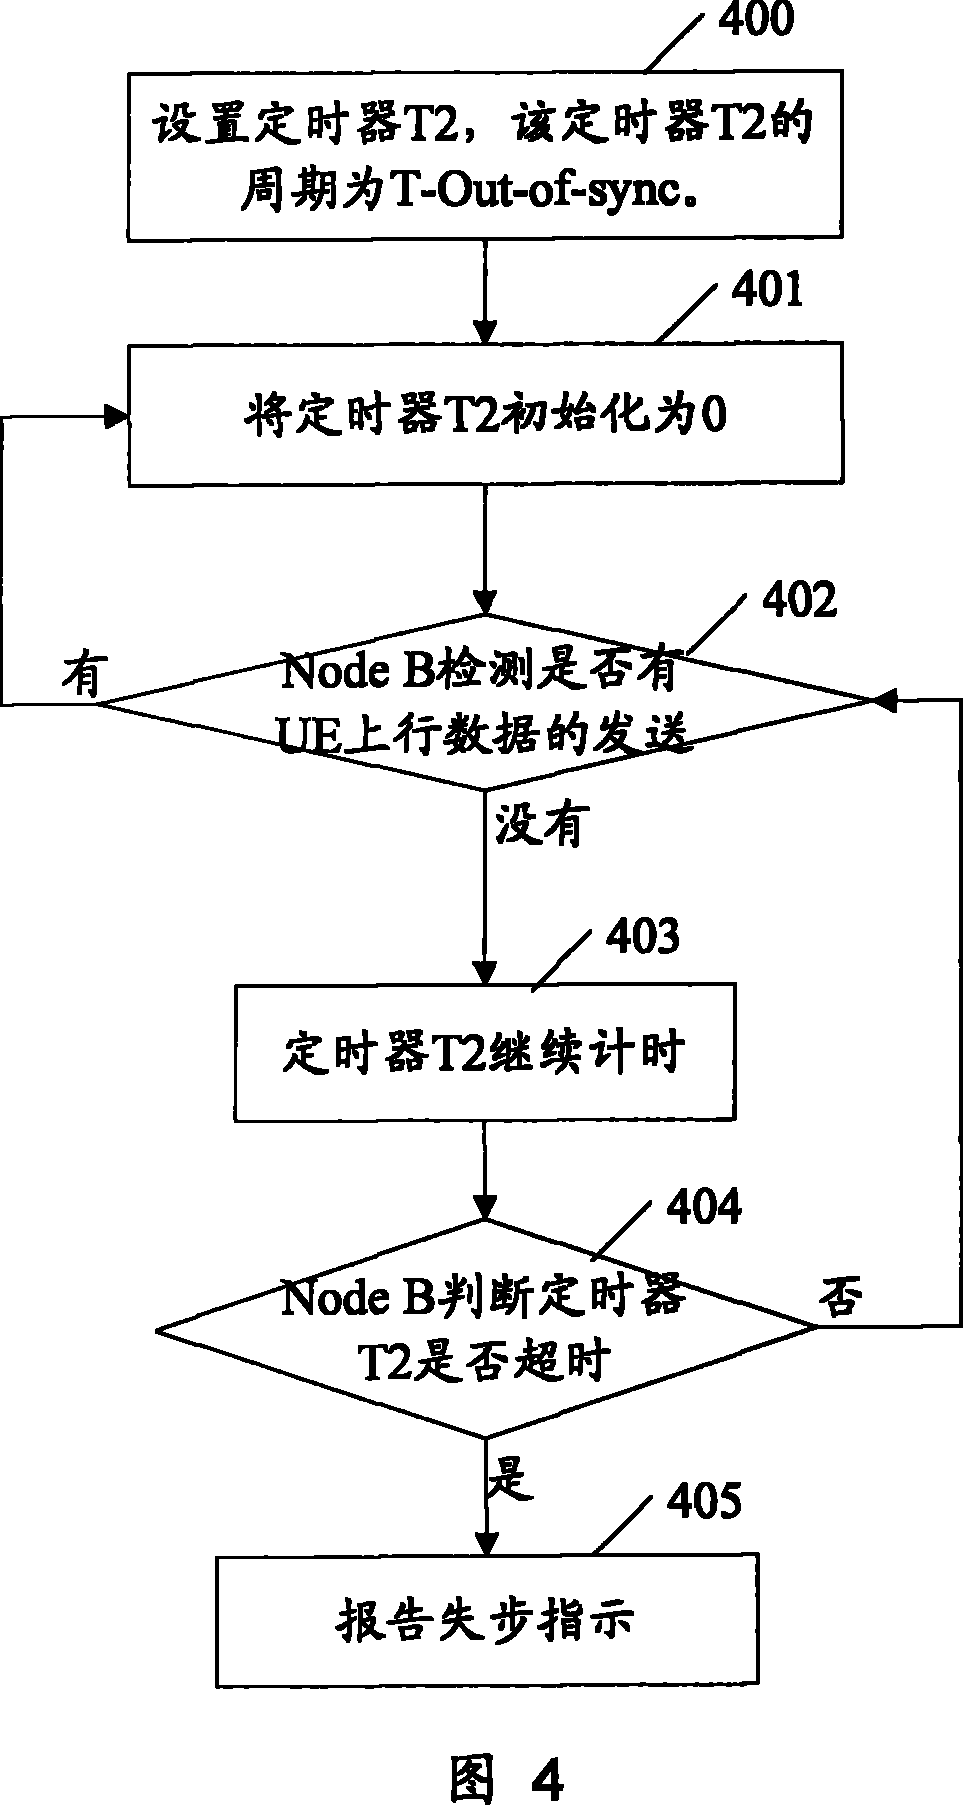 In-sync and out-of-sync indication reporting method and apparatus, wireless link monitoring method and system